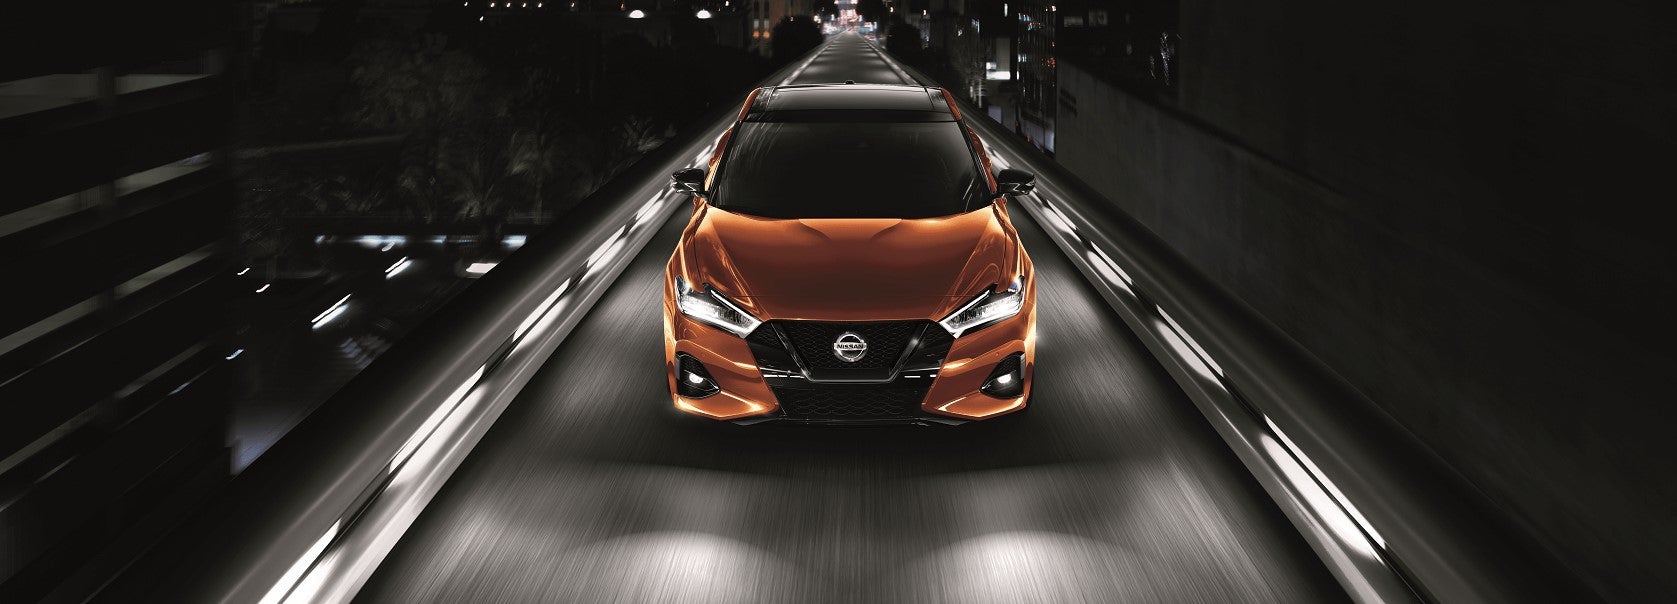 2021 Nissan Maxima Review Indianapolis IN